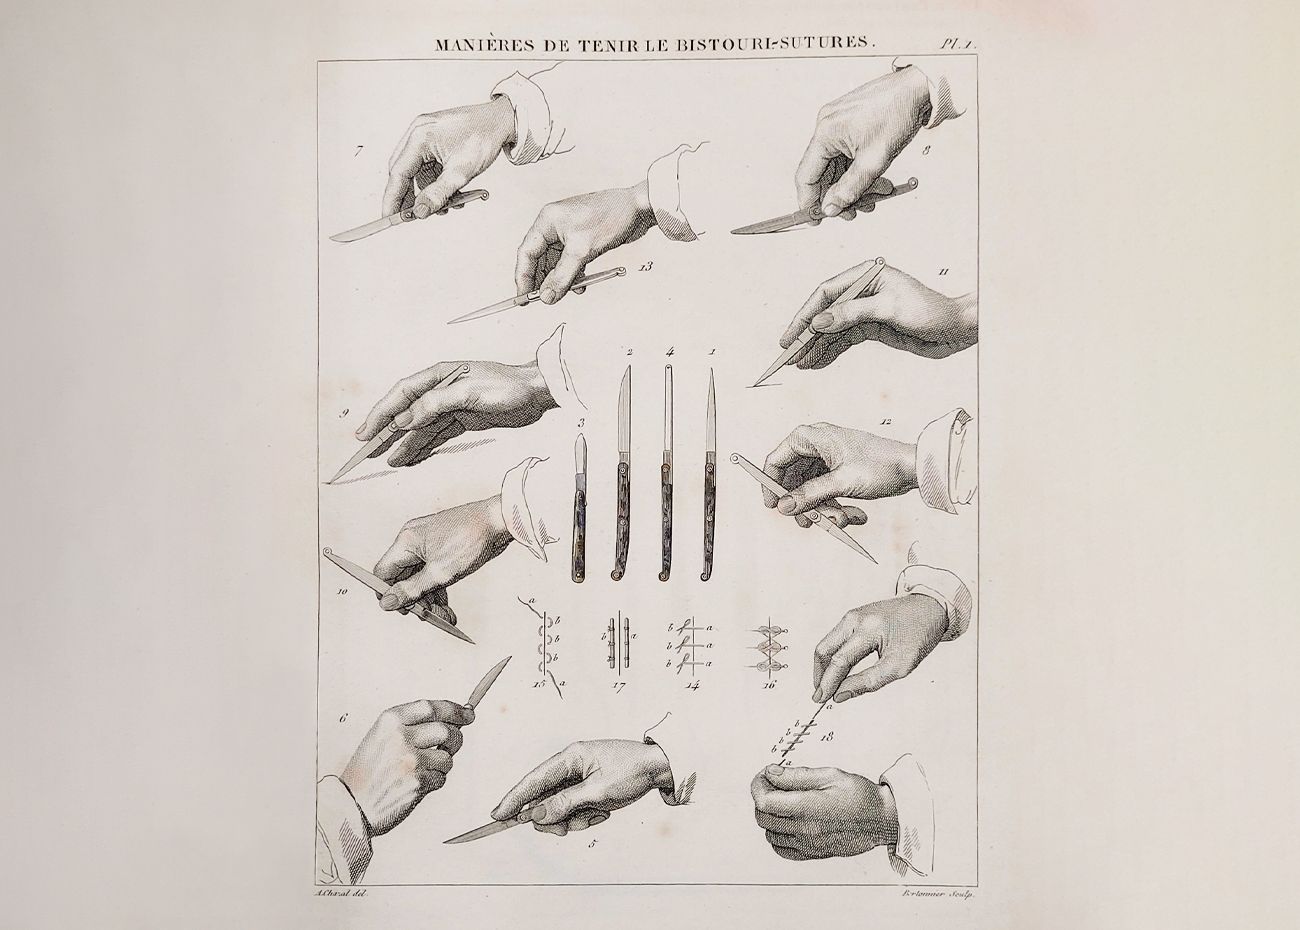 Medical illustration of hands holding scalpels in different positions